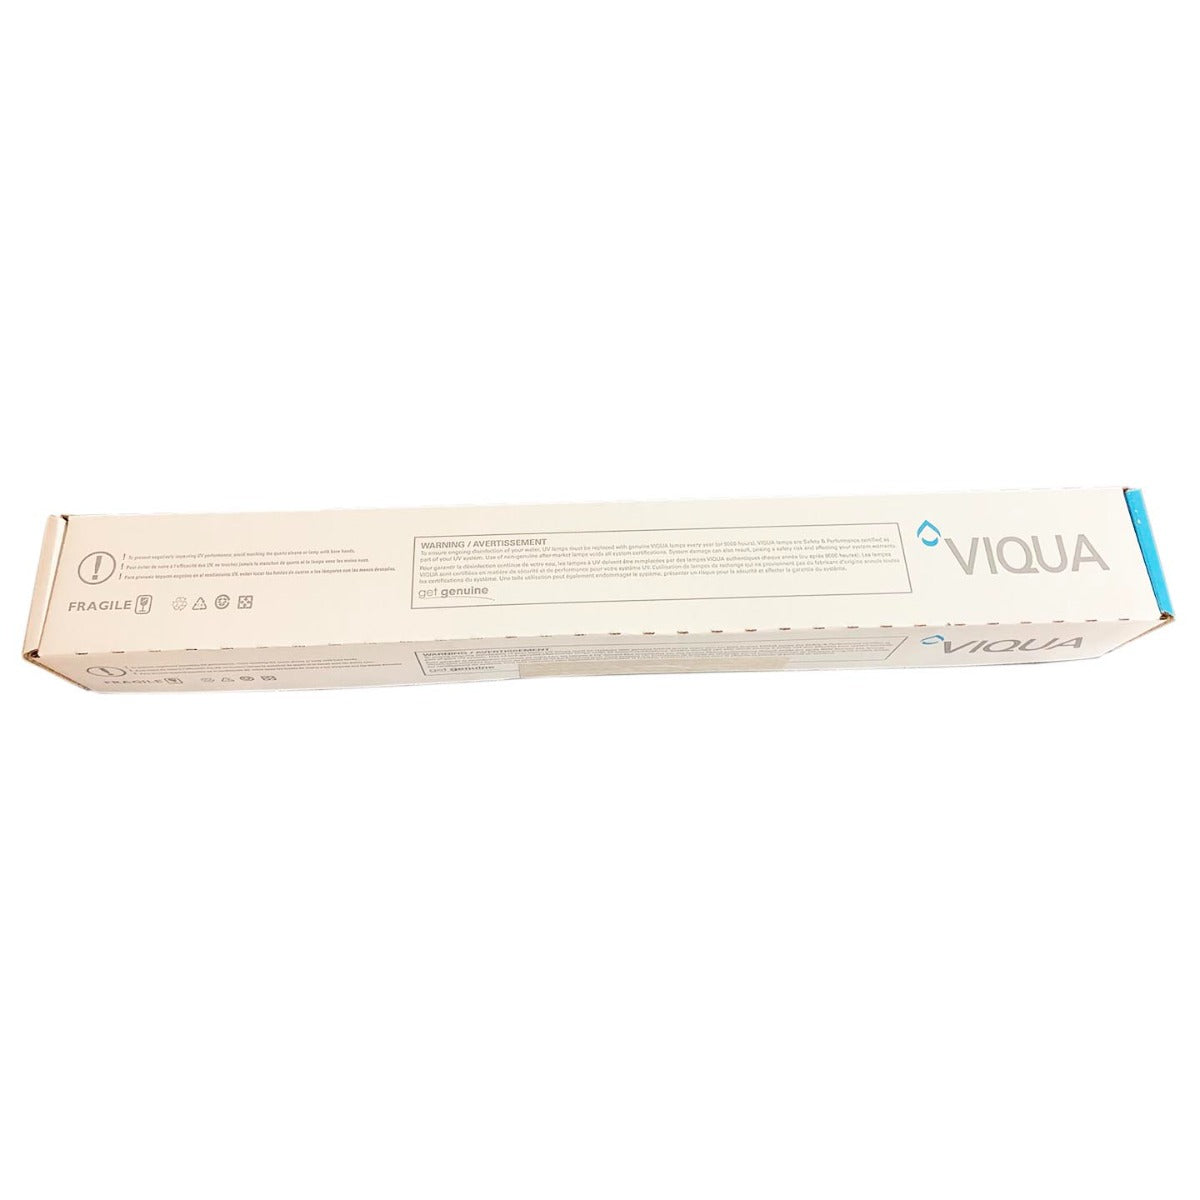 602805 Water Disinfection System UV Lamp by Viqua